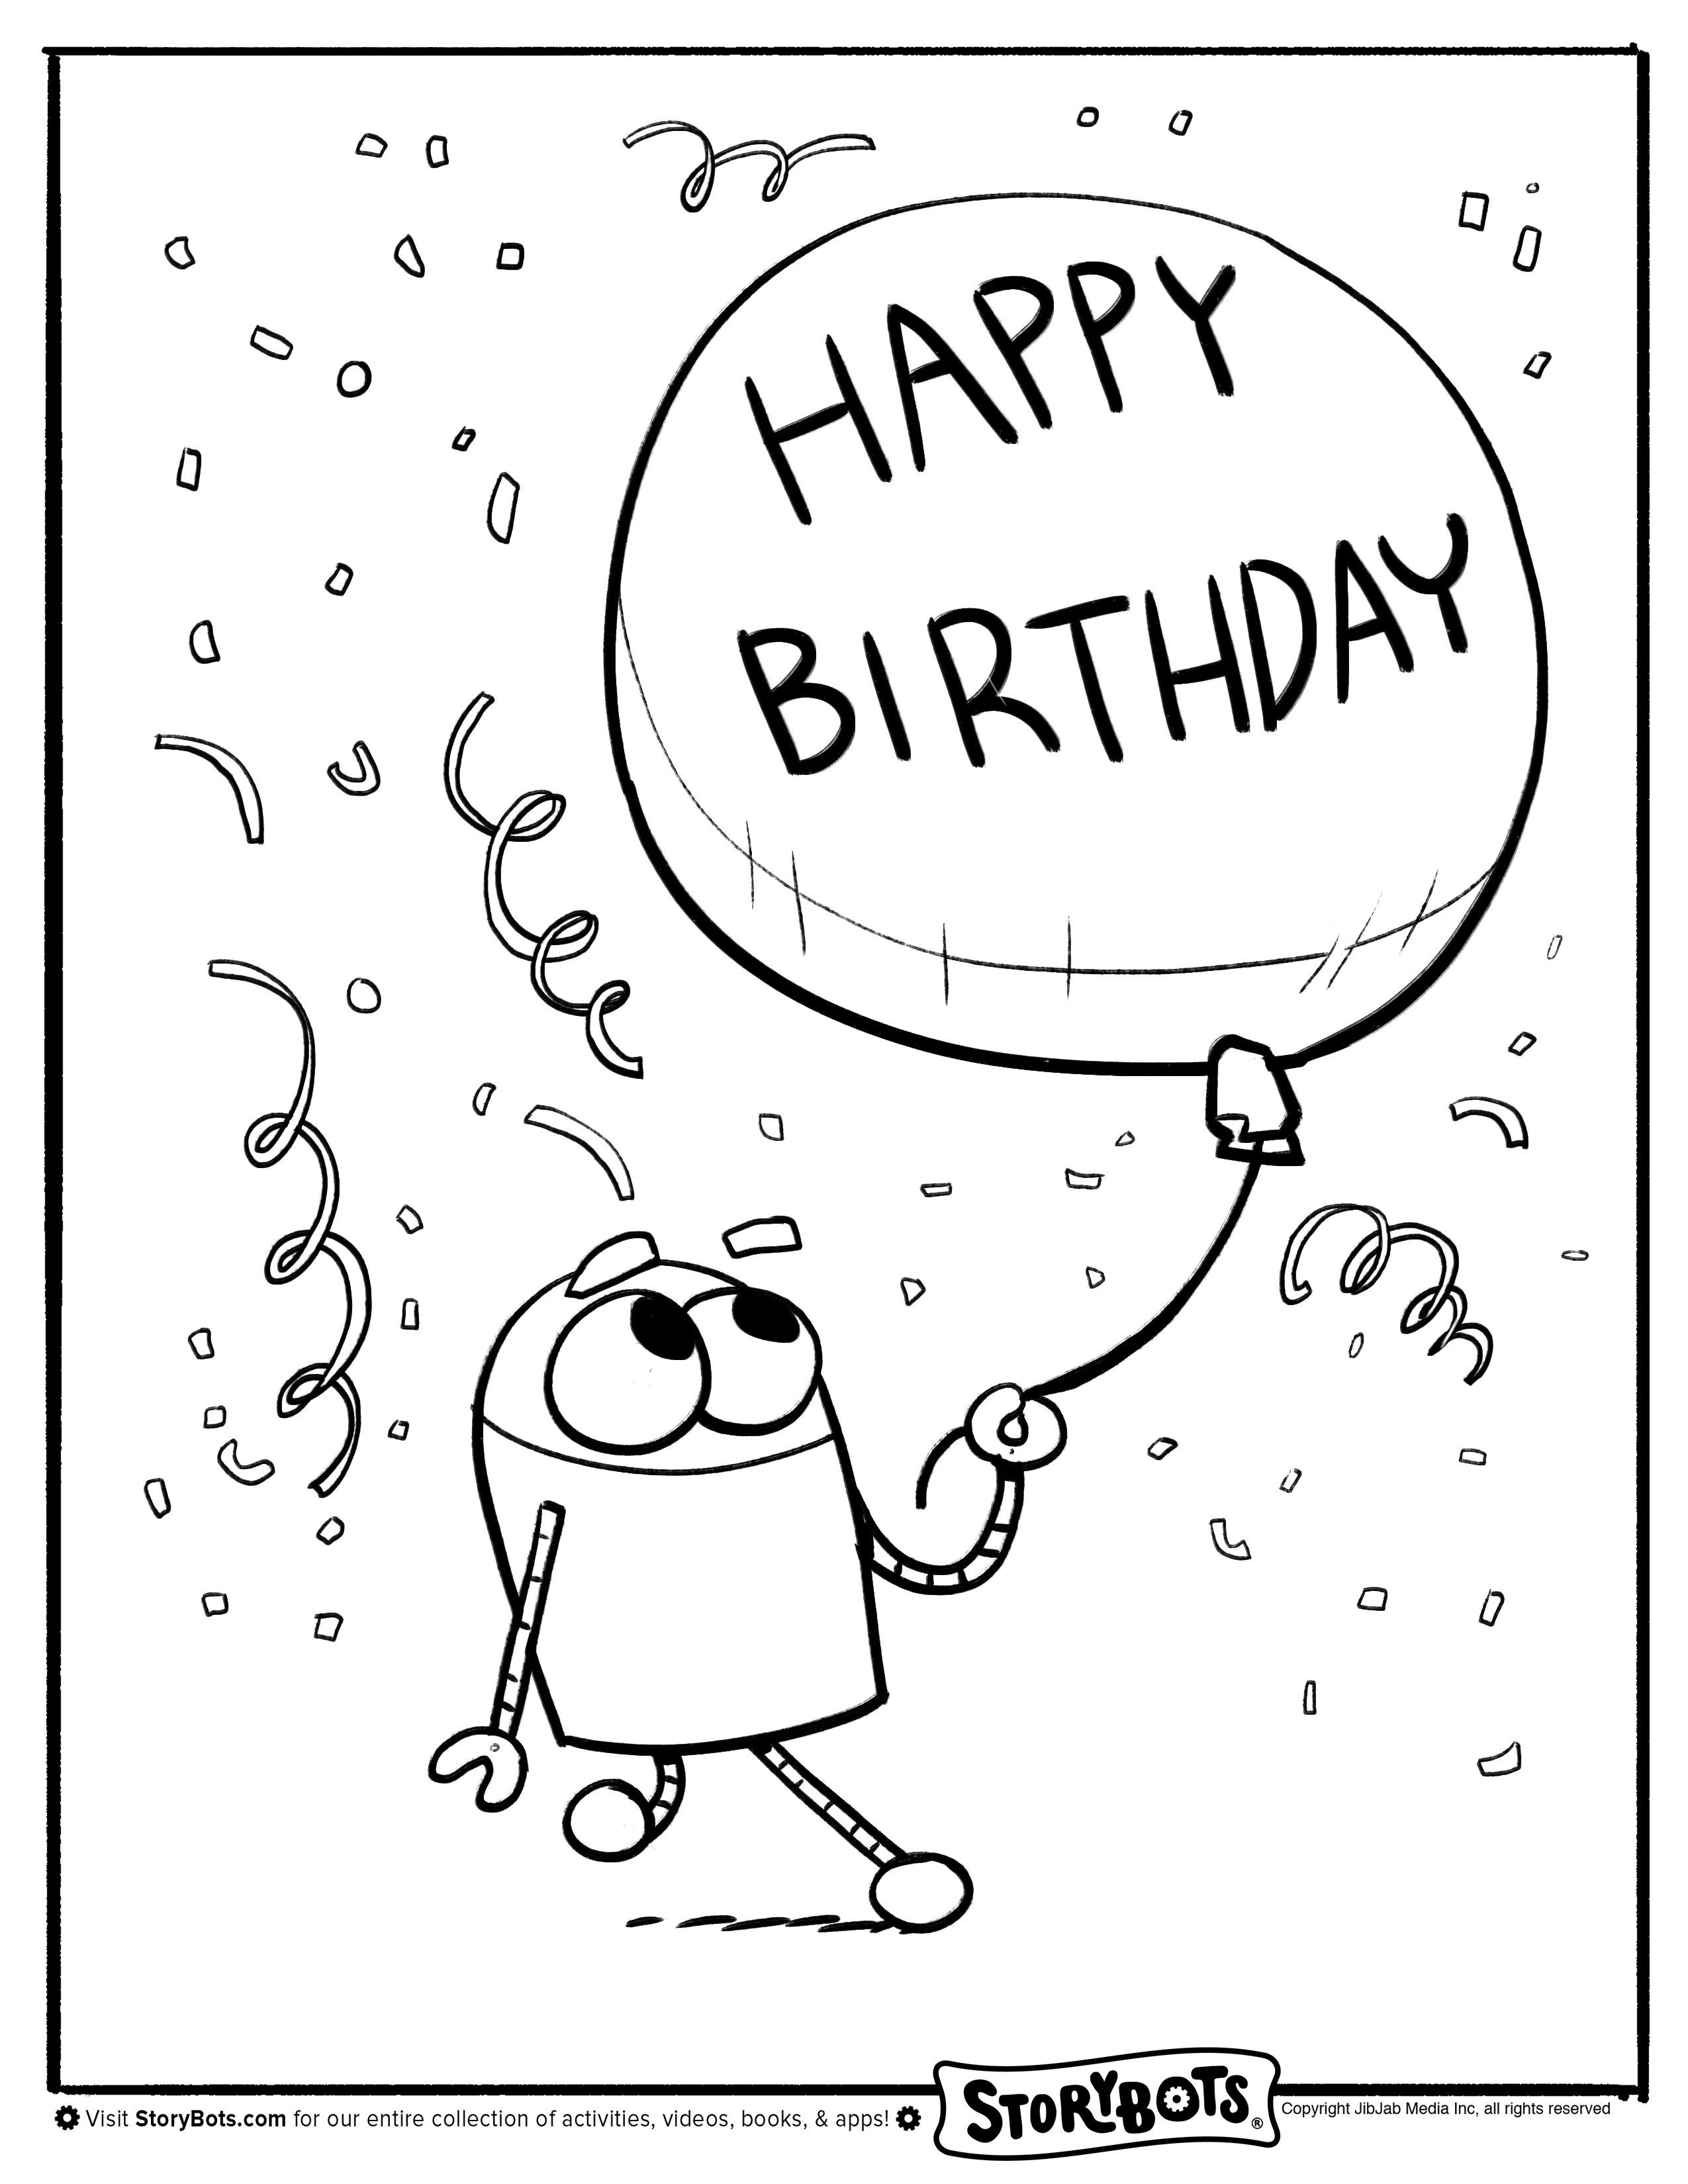 Storybots Coloring Pages - Best Coloring Pages For Kids | Happy birthday coloring  pages, Birthday coloring pages, Coloring pages